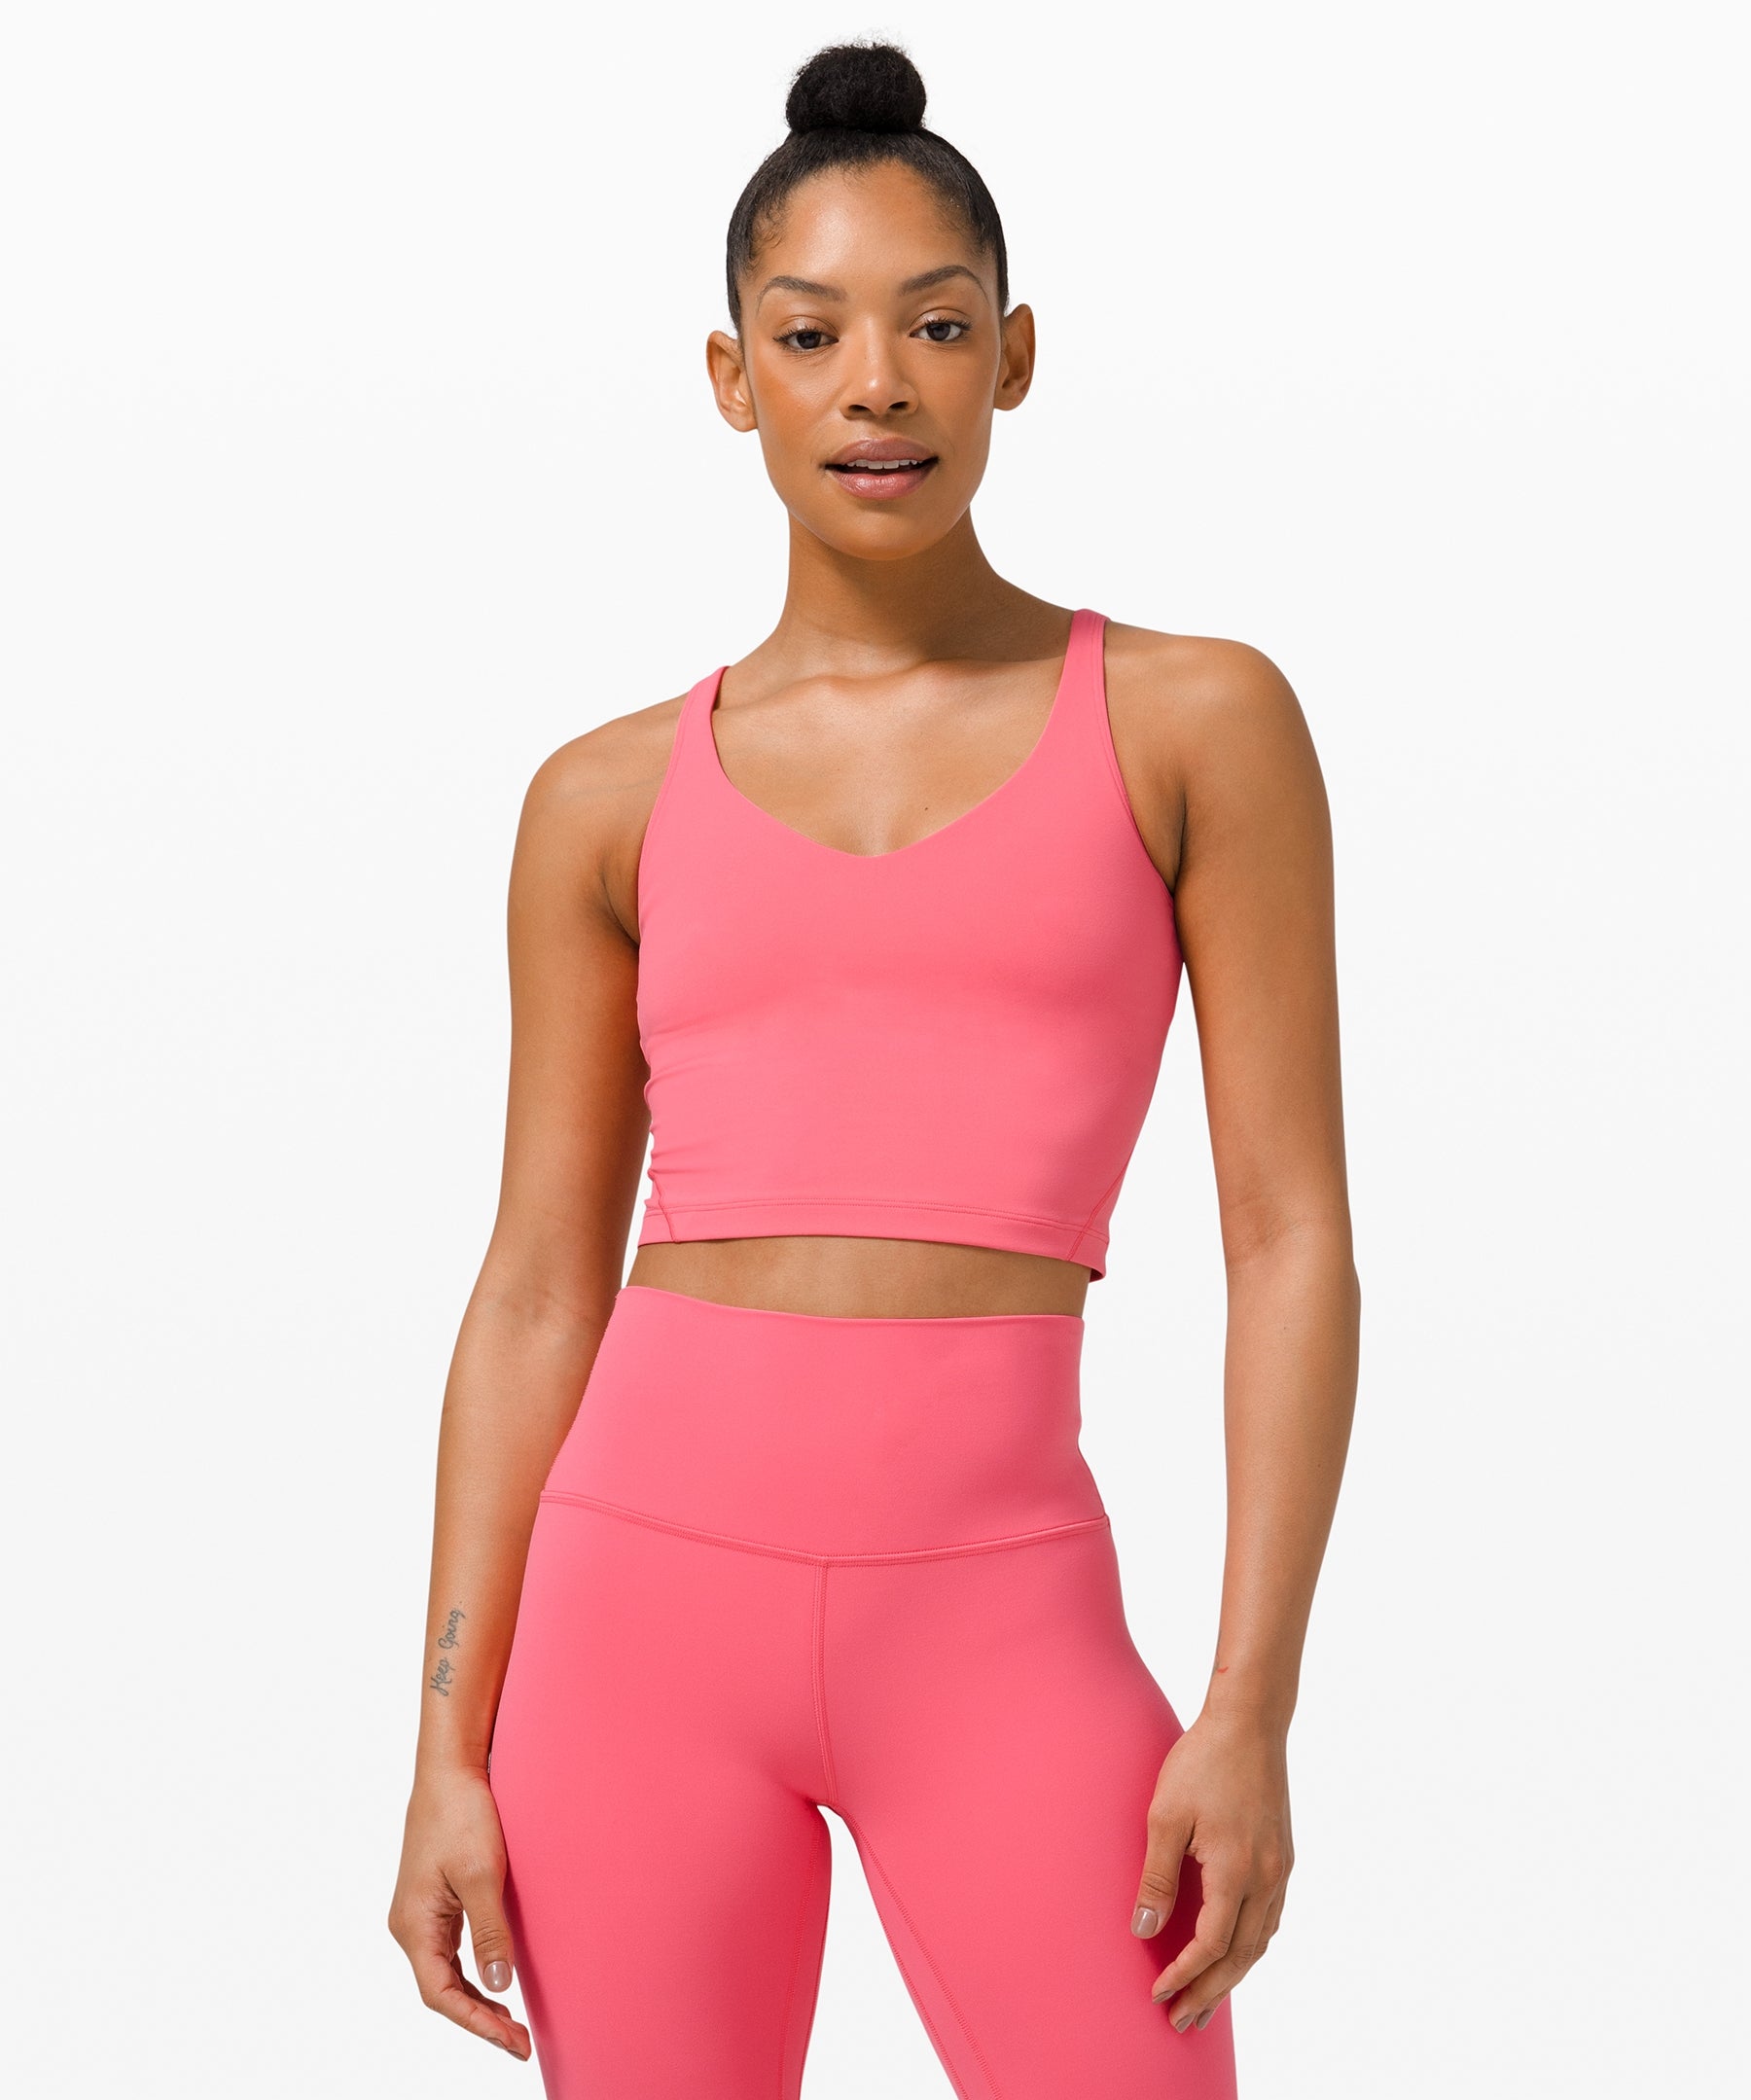 6 Summer Closet Staples You Should Own (from lululemon!) - Nourish, Move,  Love